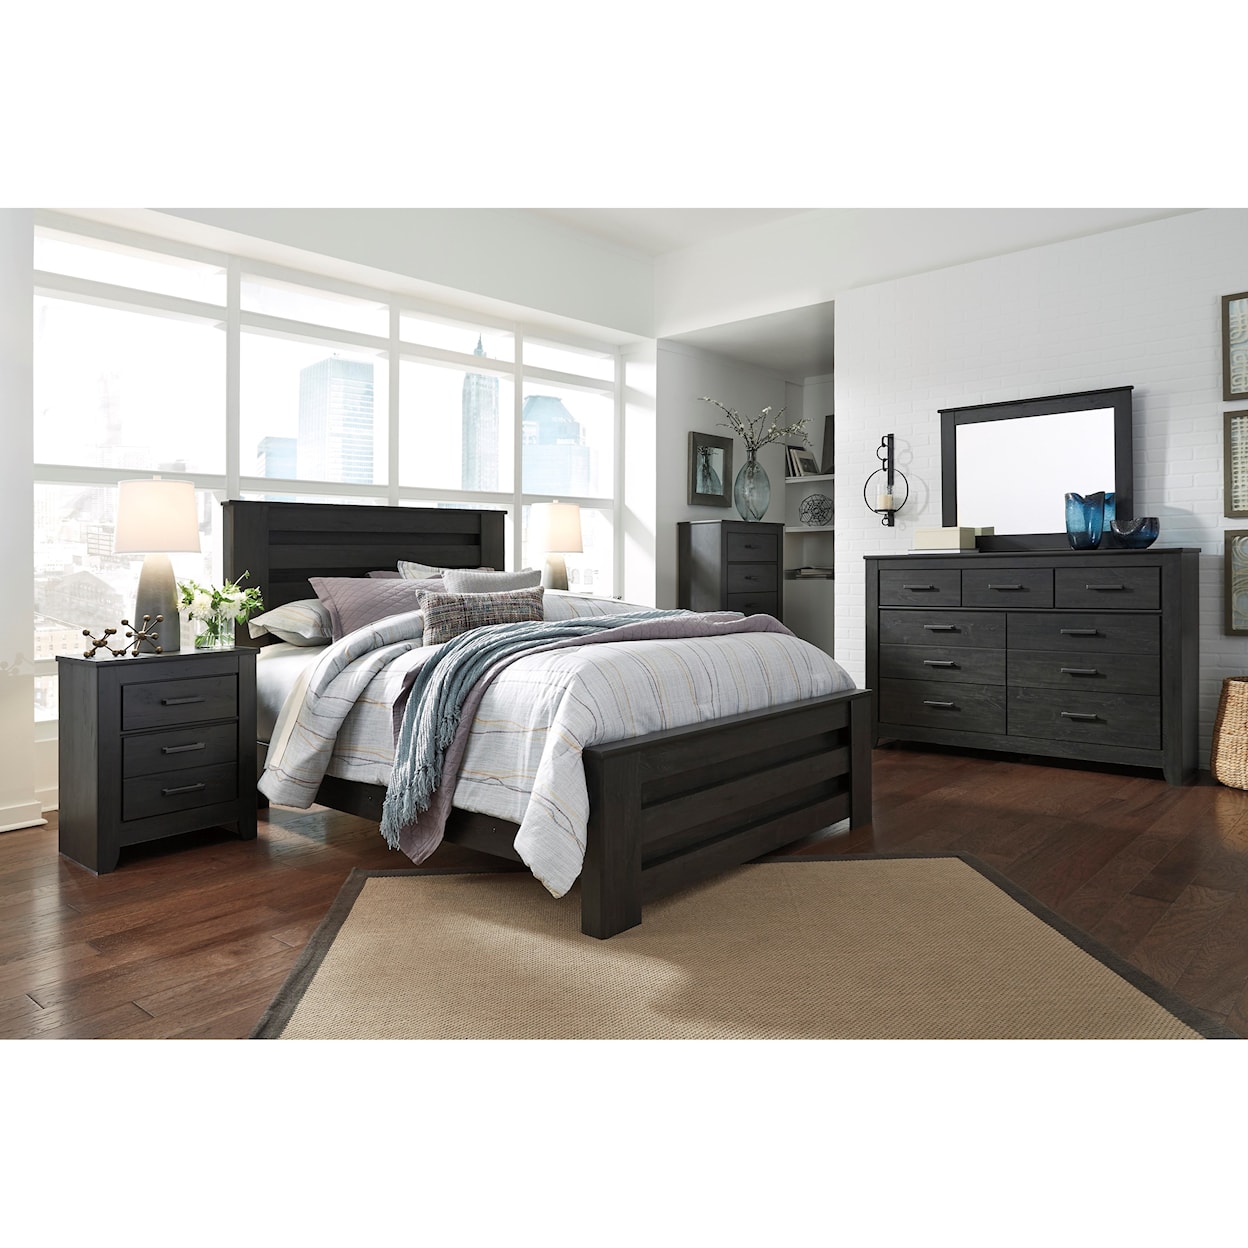 Signature Design by Ashley Brinxton King Bedroom Group